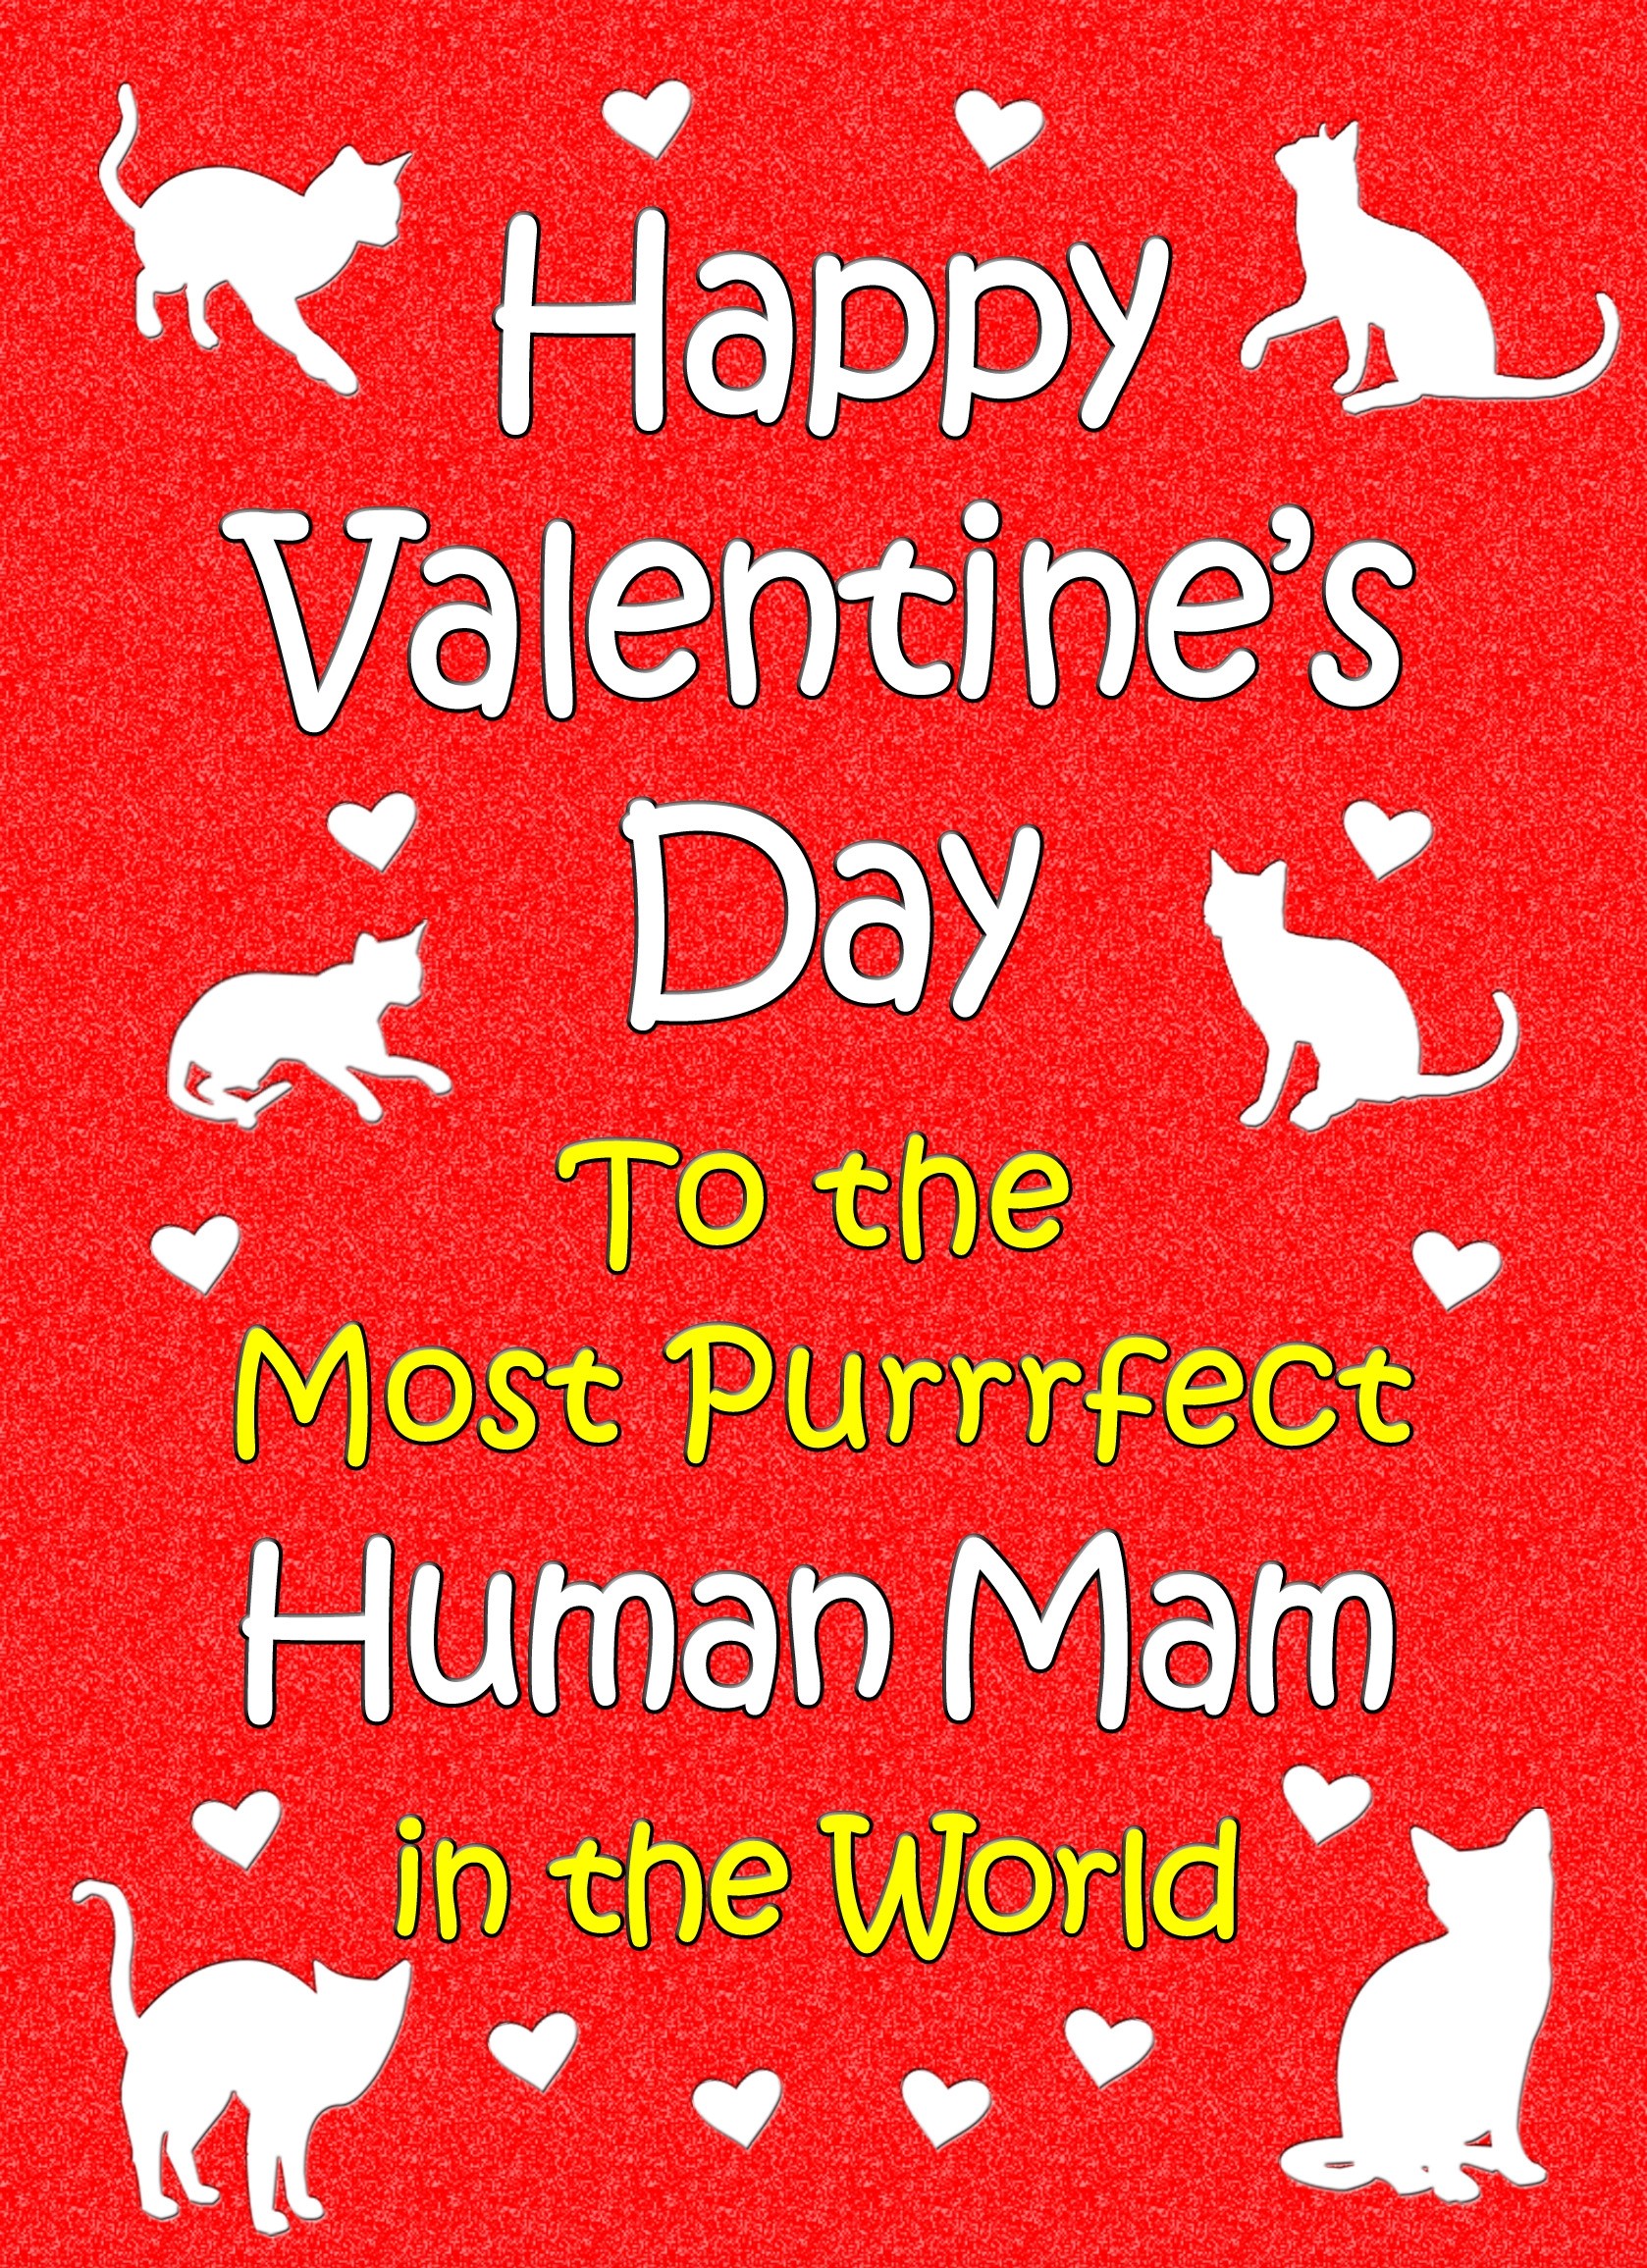 From The Cat Valentines Day Card (Human Mam)